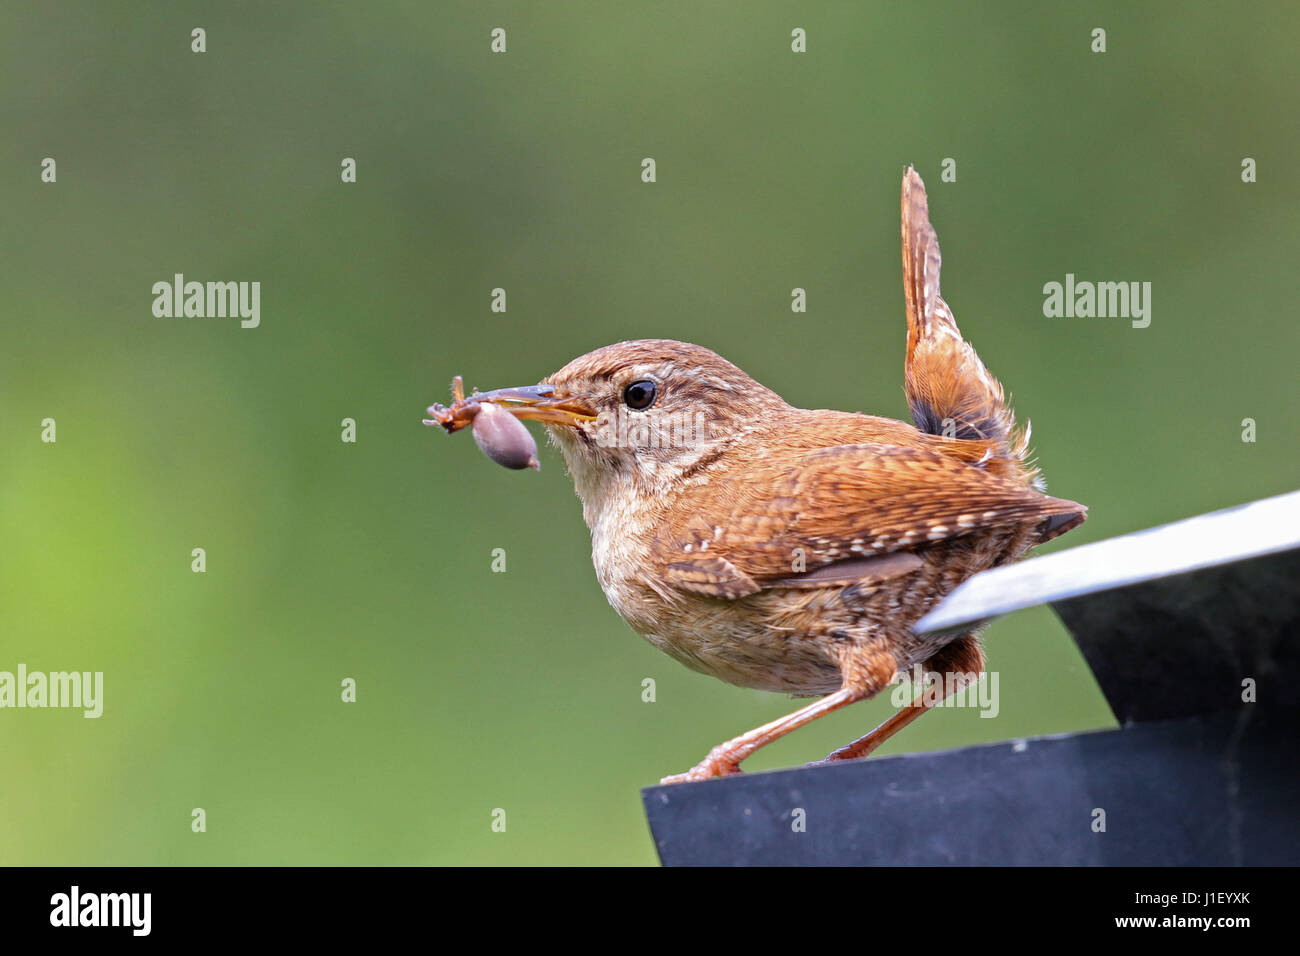 Adult eurasian wren carrying insect to feed young Stock Photo